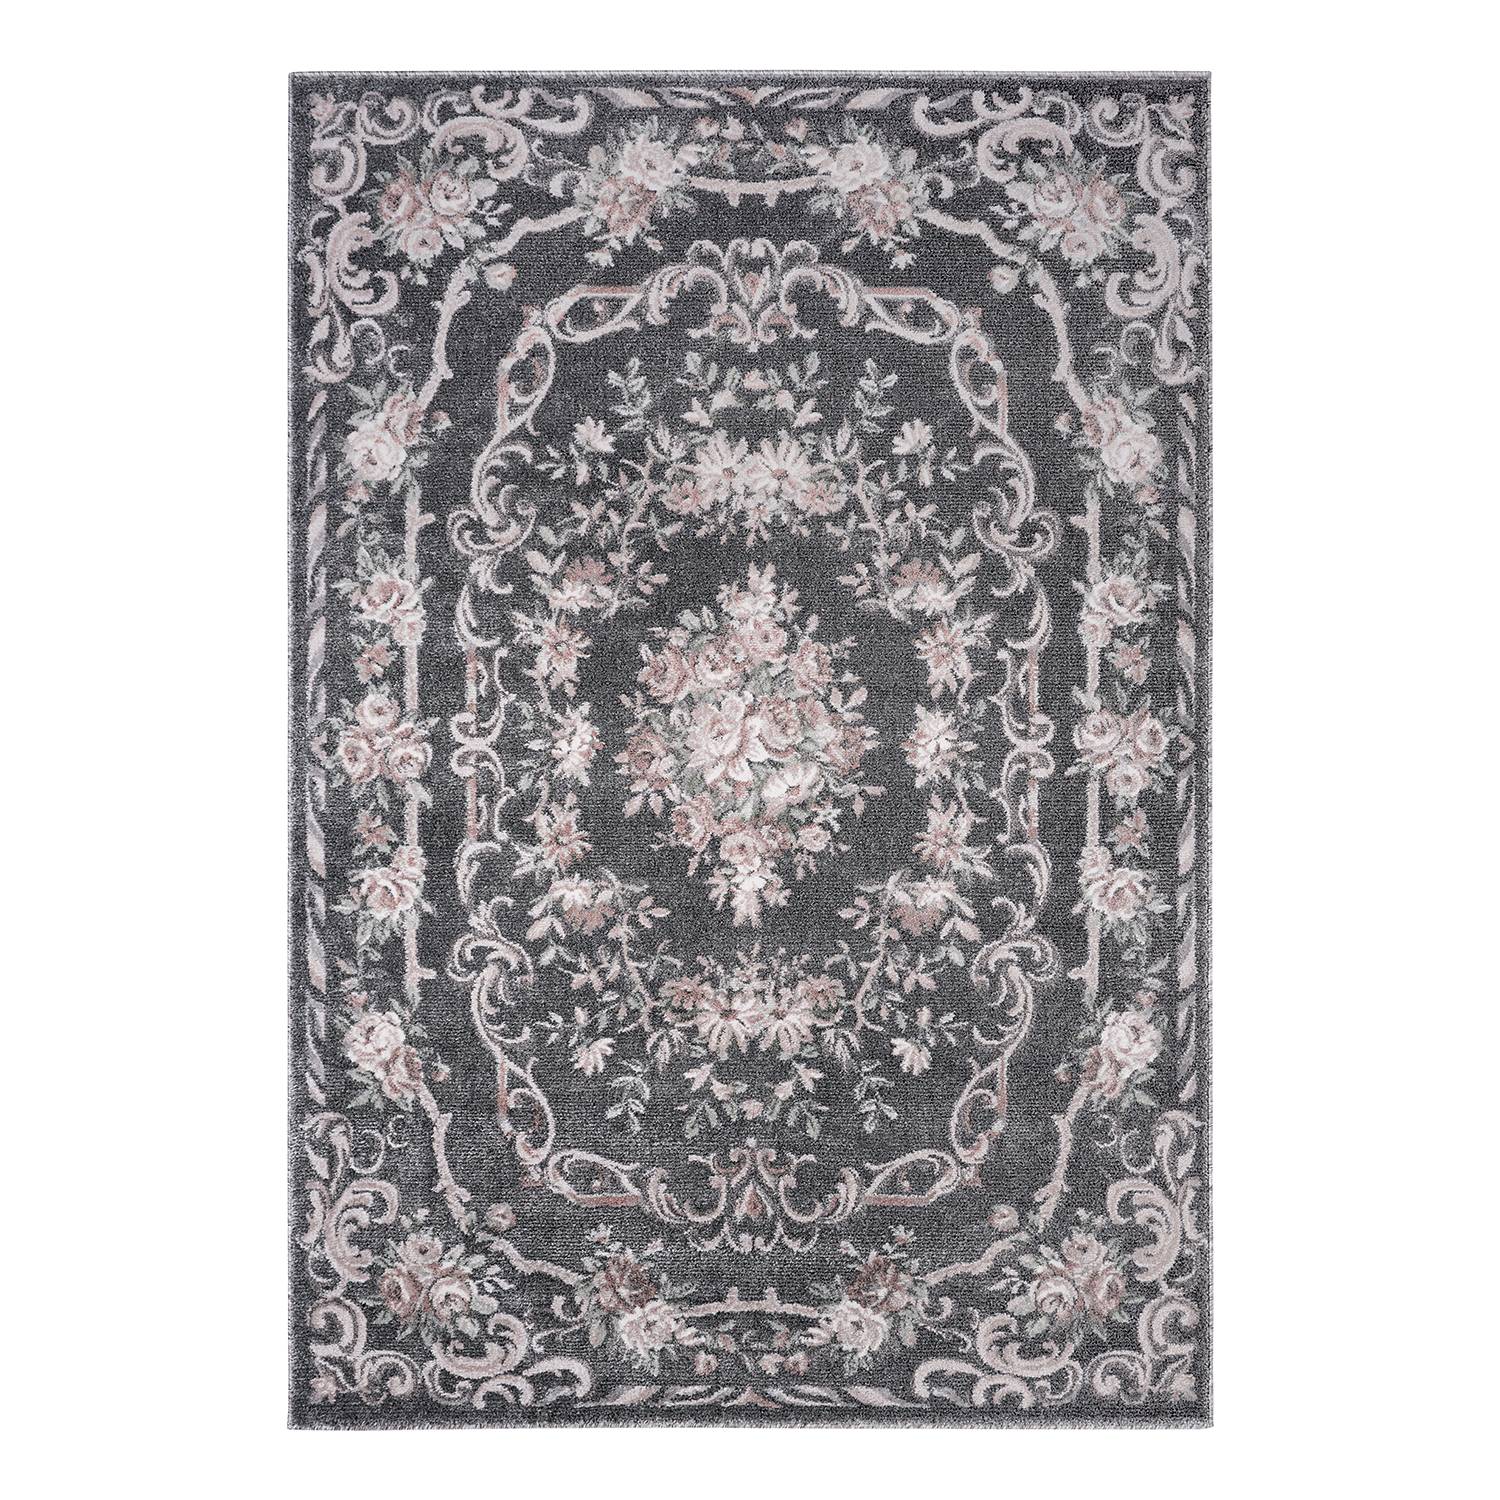 Image of Tapis Aubusson Flore 000000001000244254